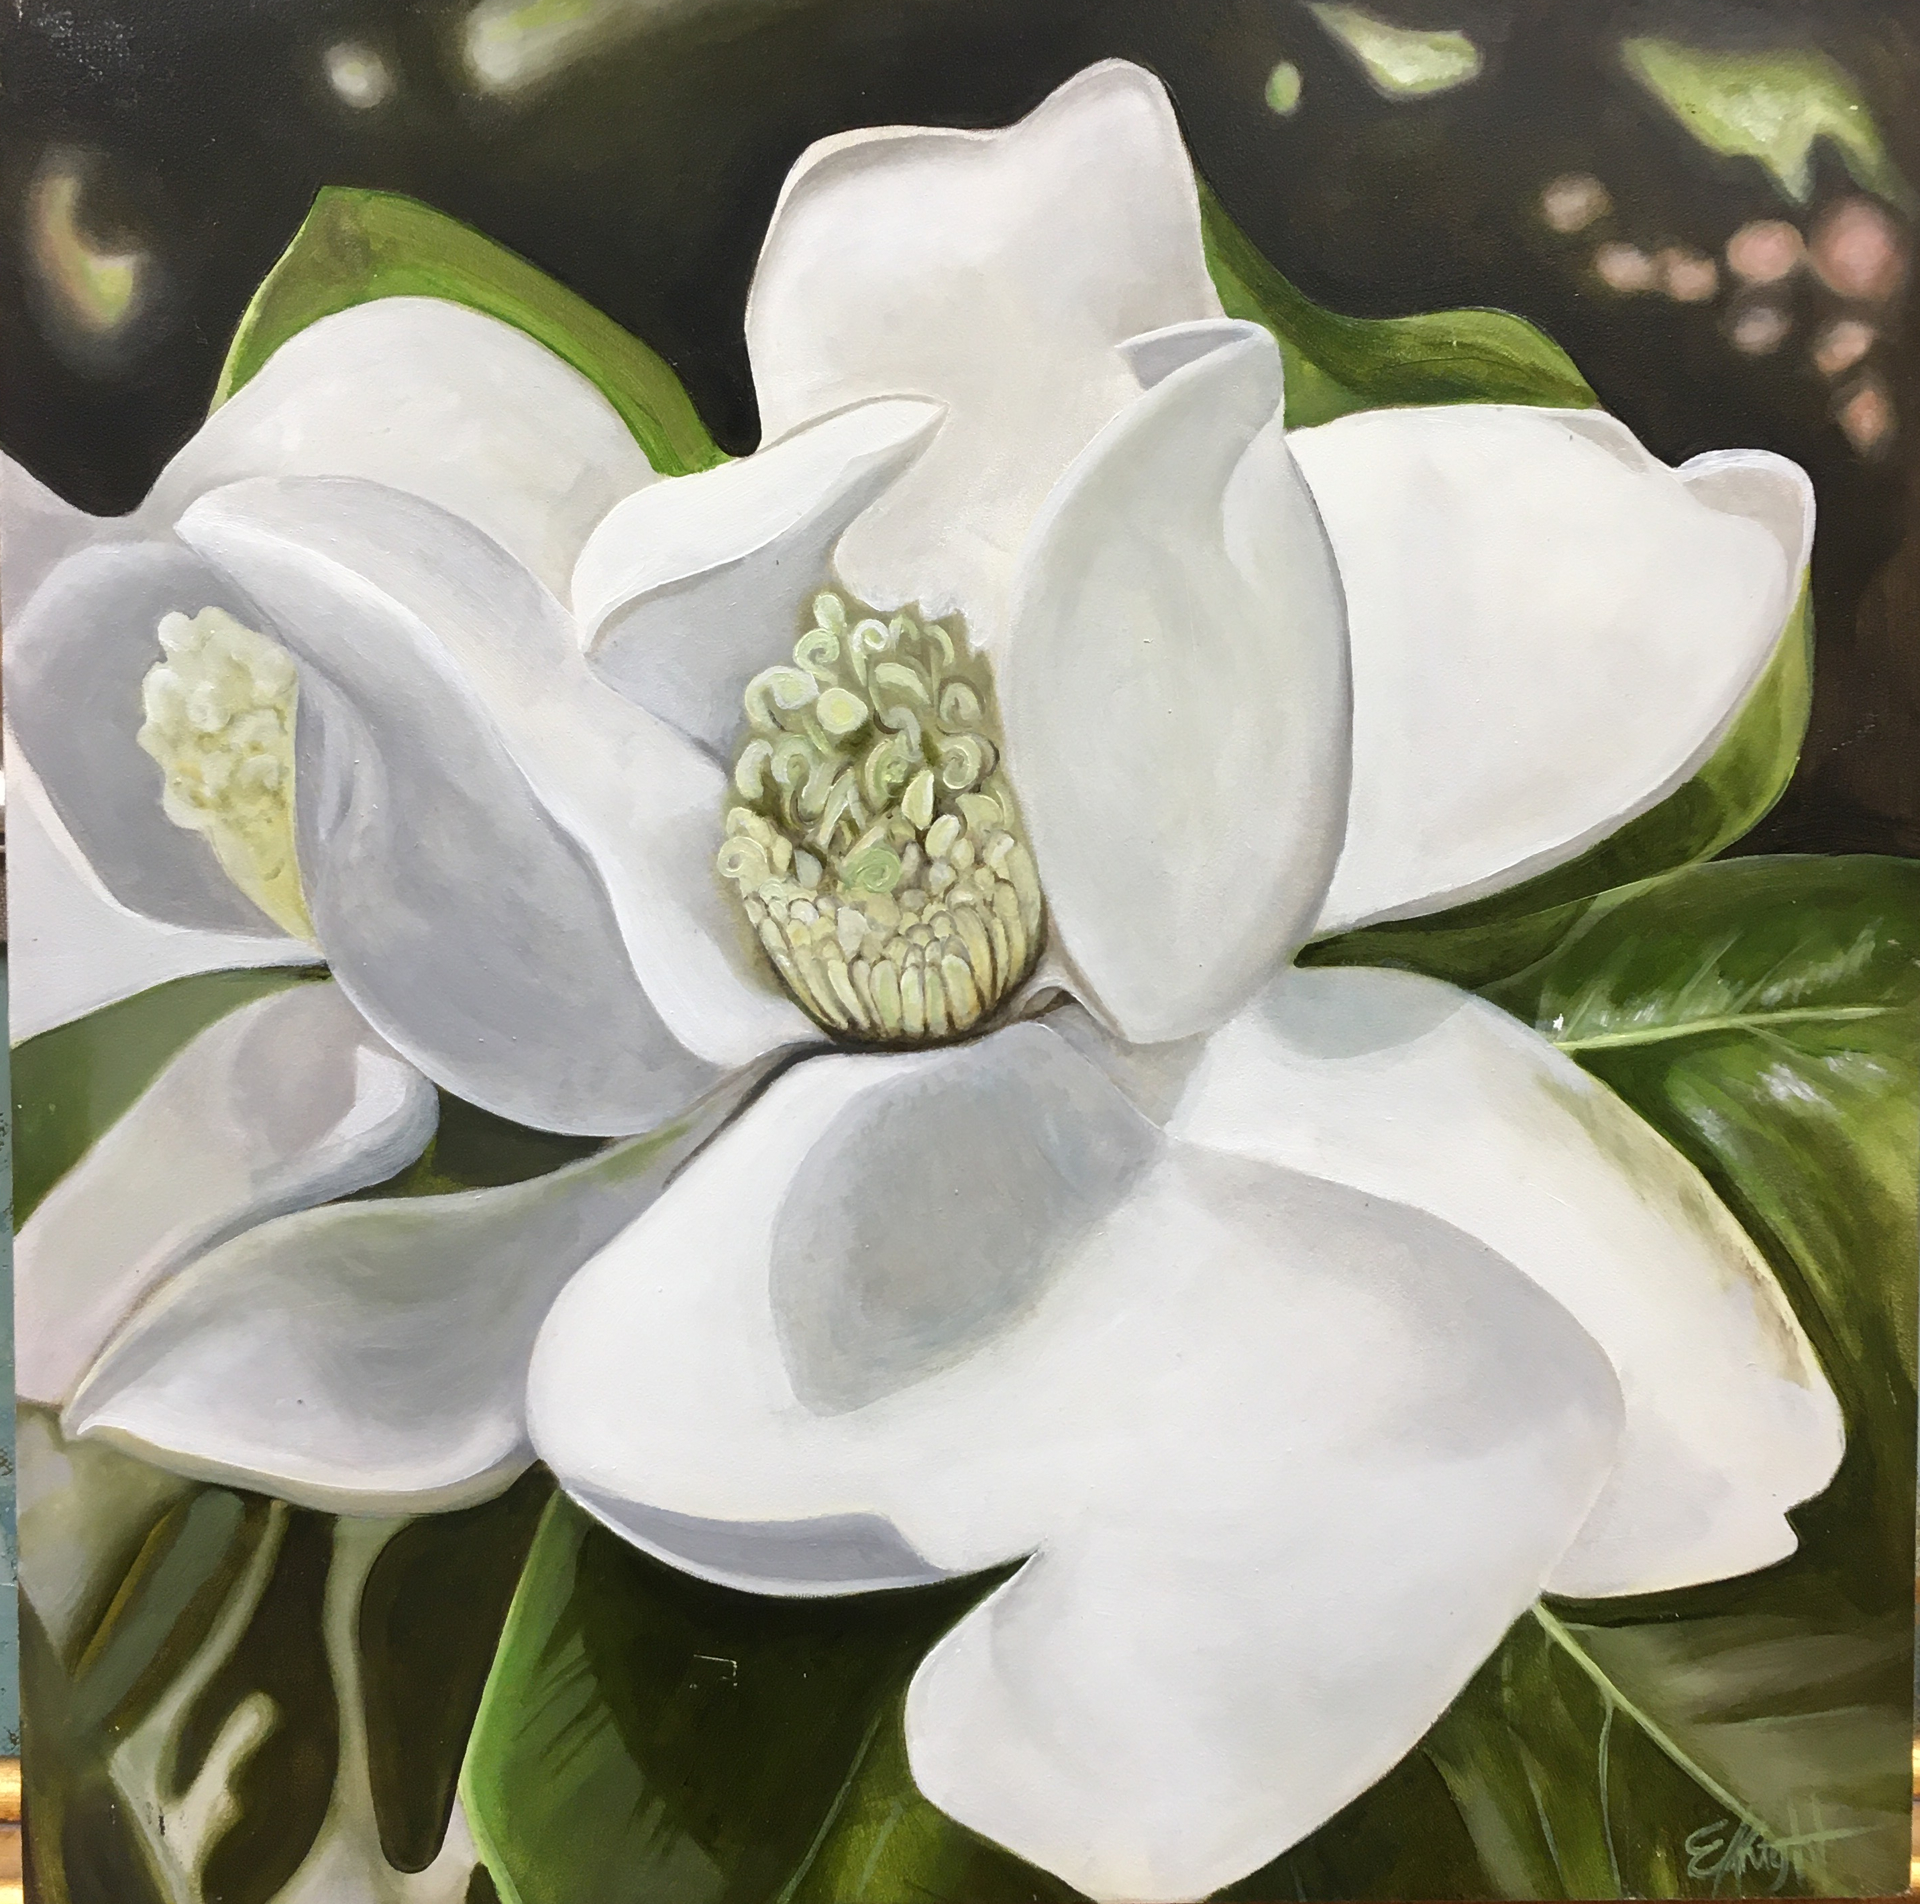 Lewis Ginter Magnolia by Emma Knight